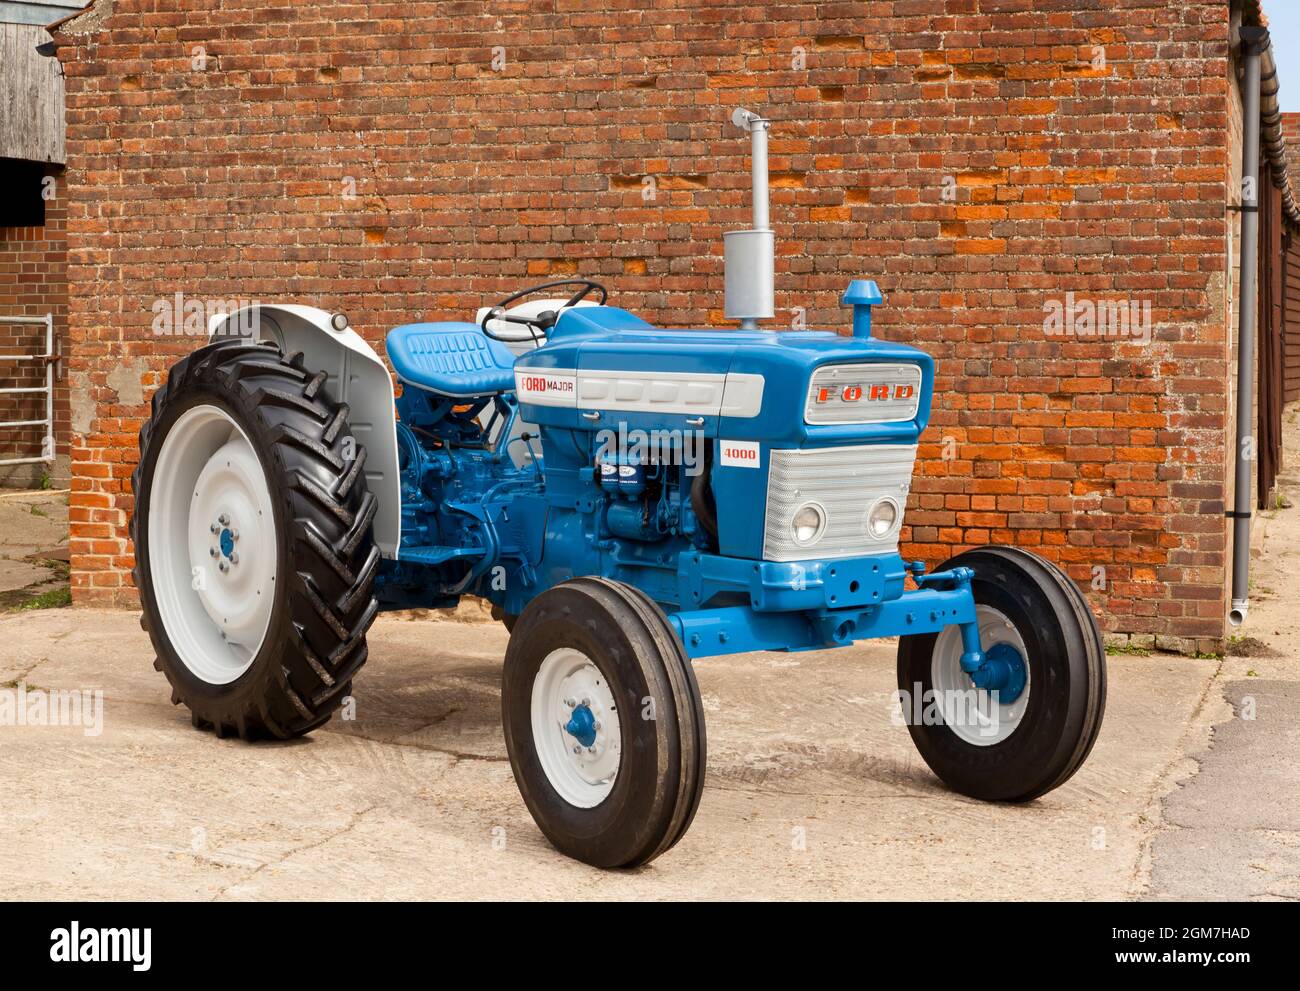 Ford 4000 Pre Force vintage tractor Stock Photo